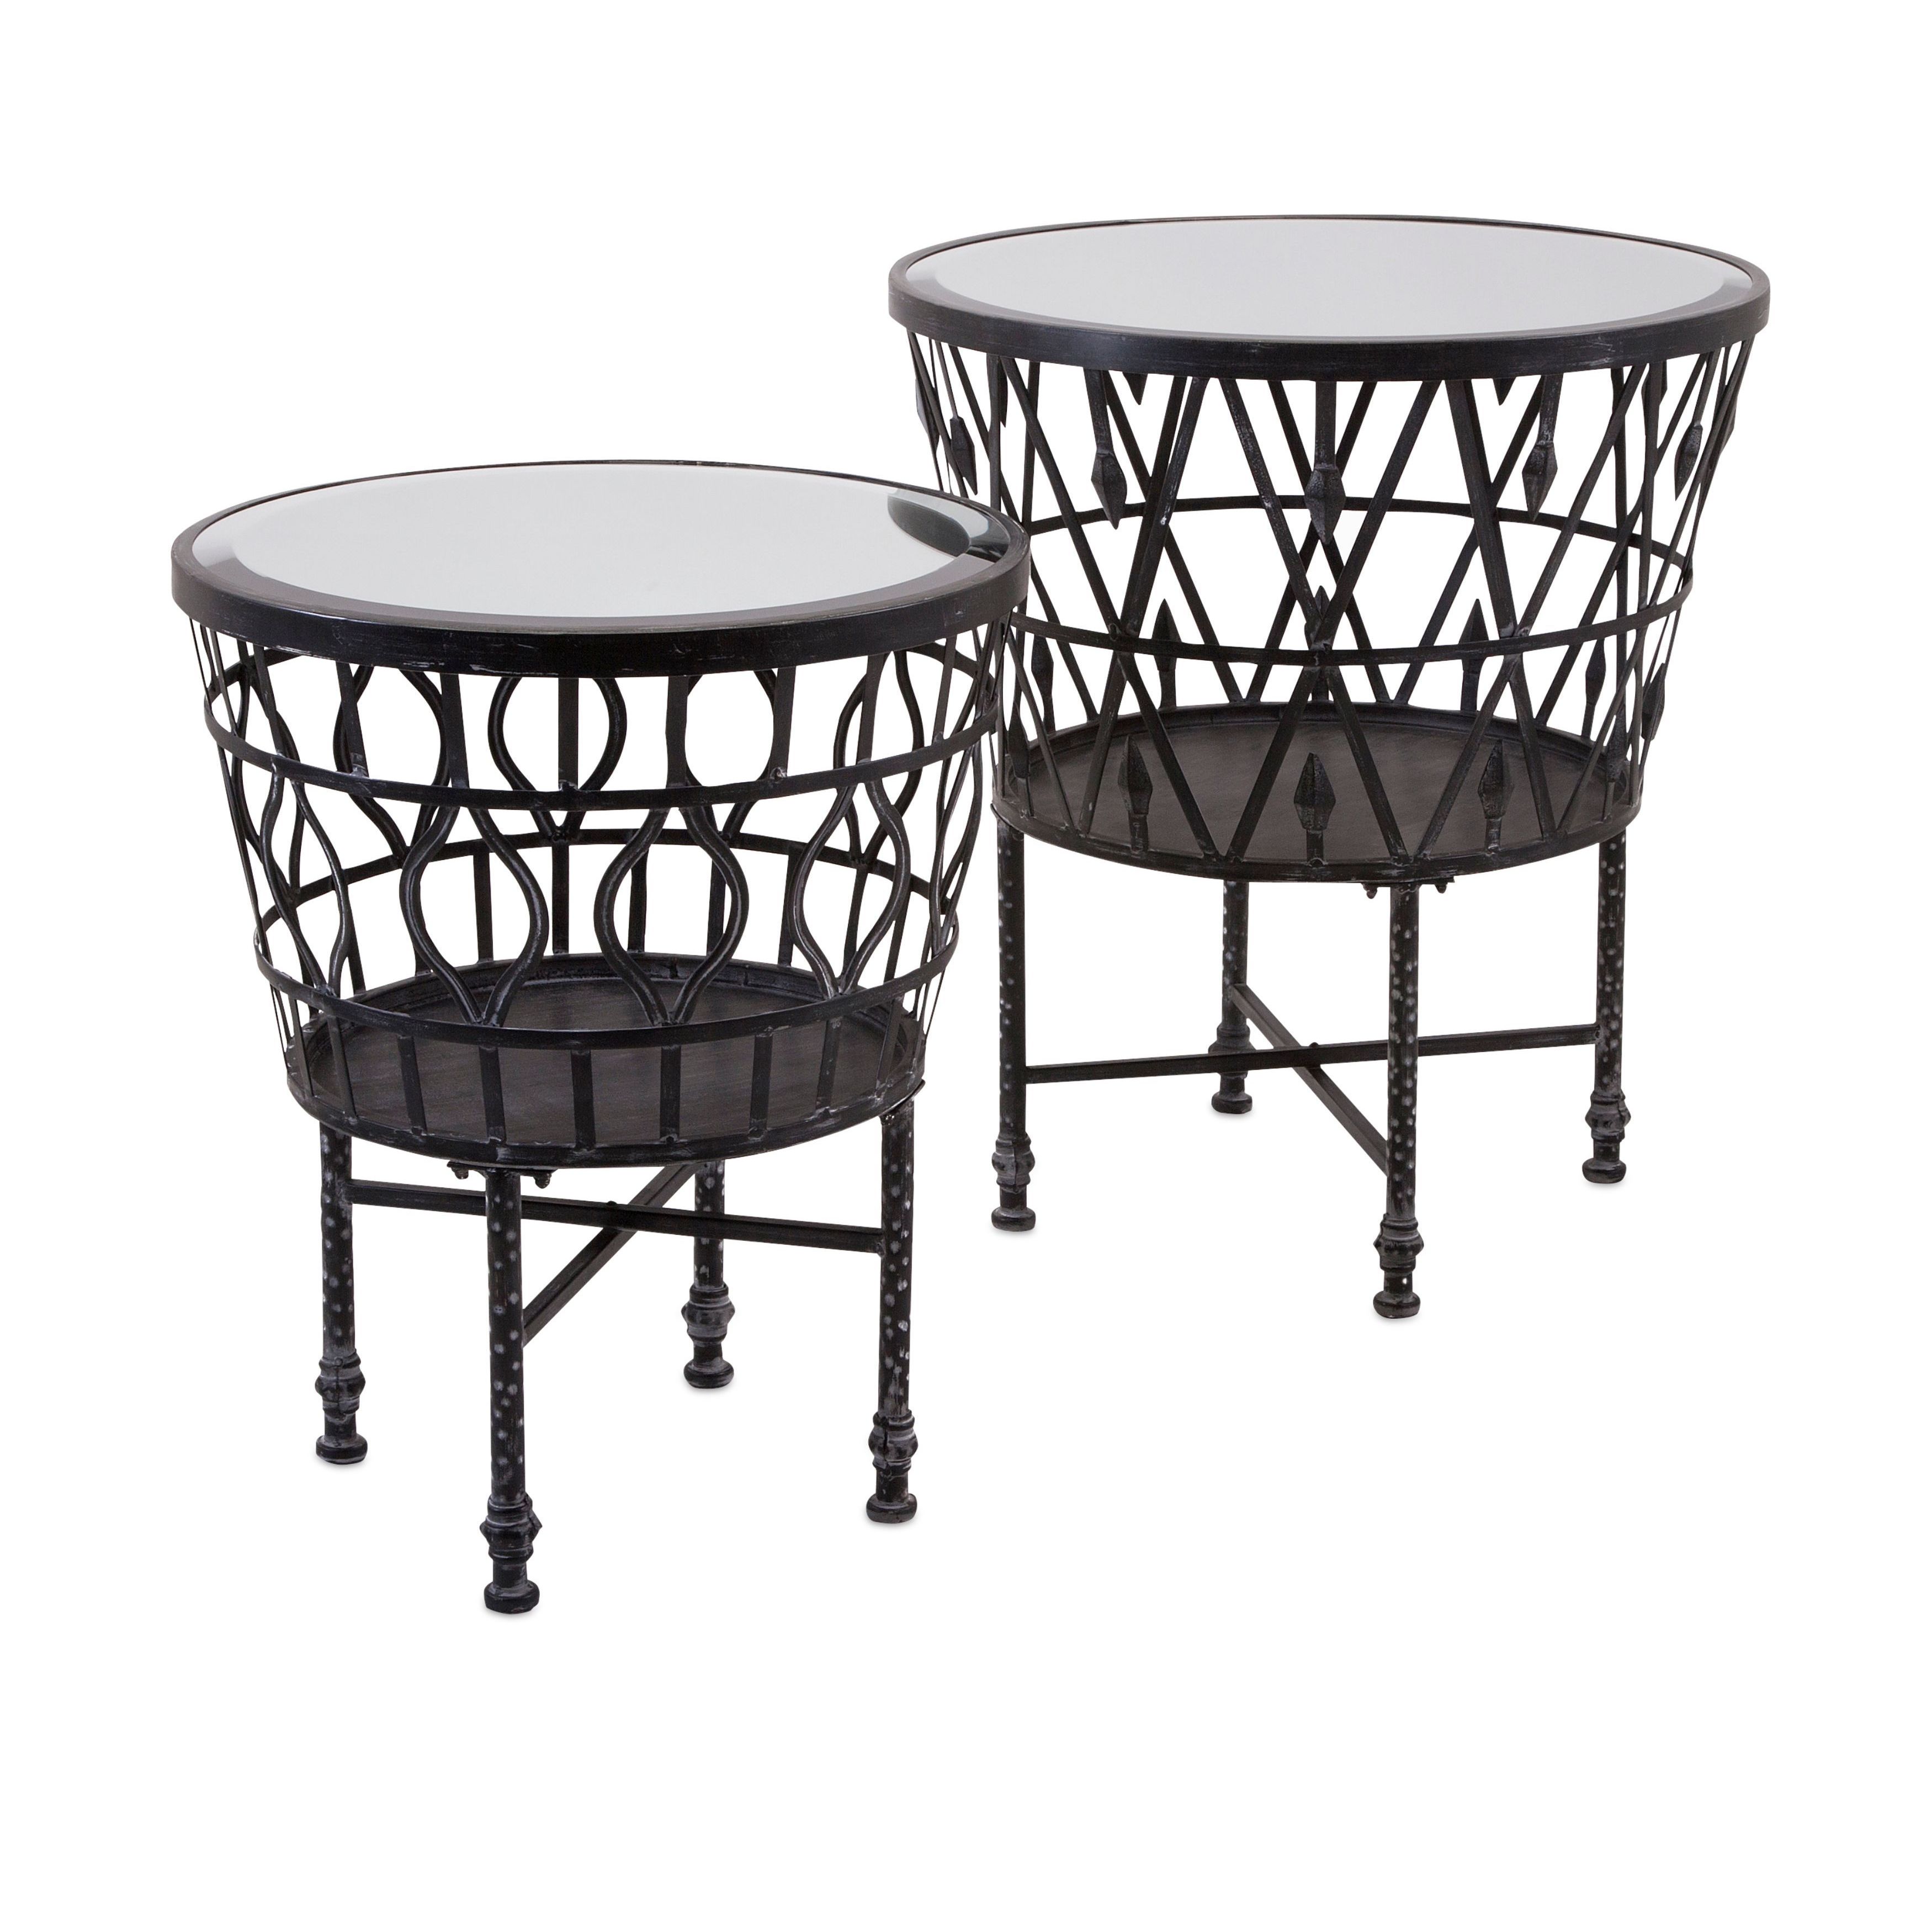 zaria drum mirror accent tables set free outdoor metal table shipping today granite coffee decorative trunks chinese patio dining sets living room cupboard side target kitchen